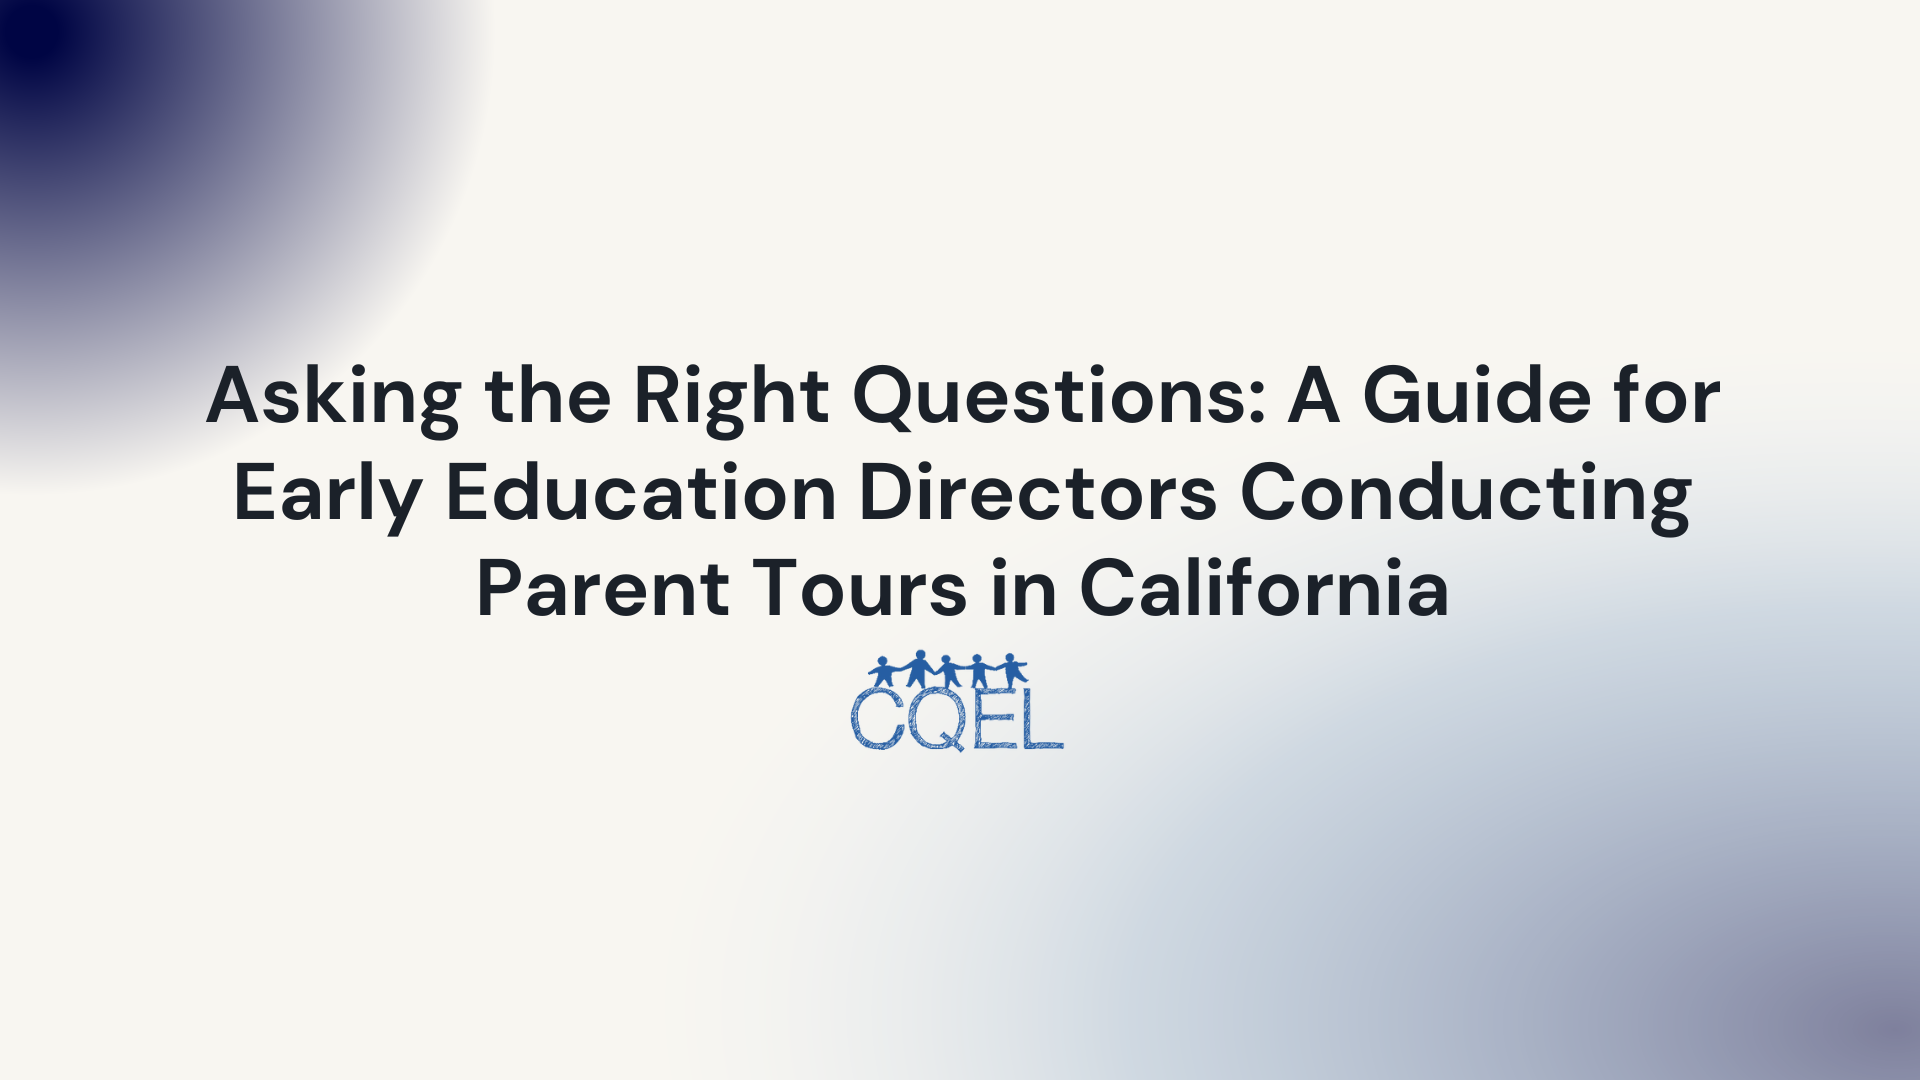 Asking the Right Questions: A Guide for Early Education Directors Conducting Parent Tours in California